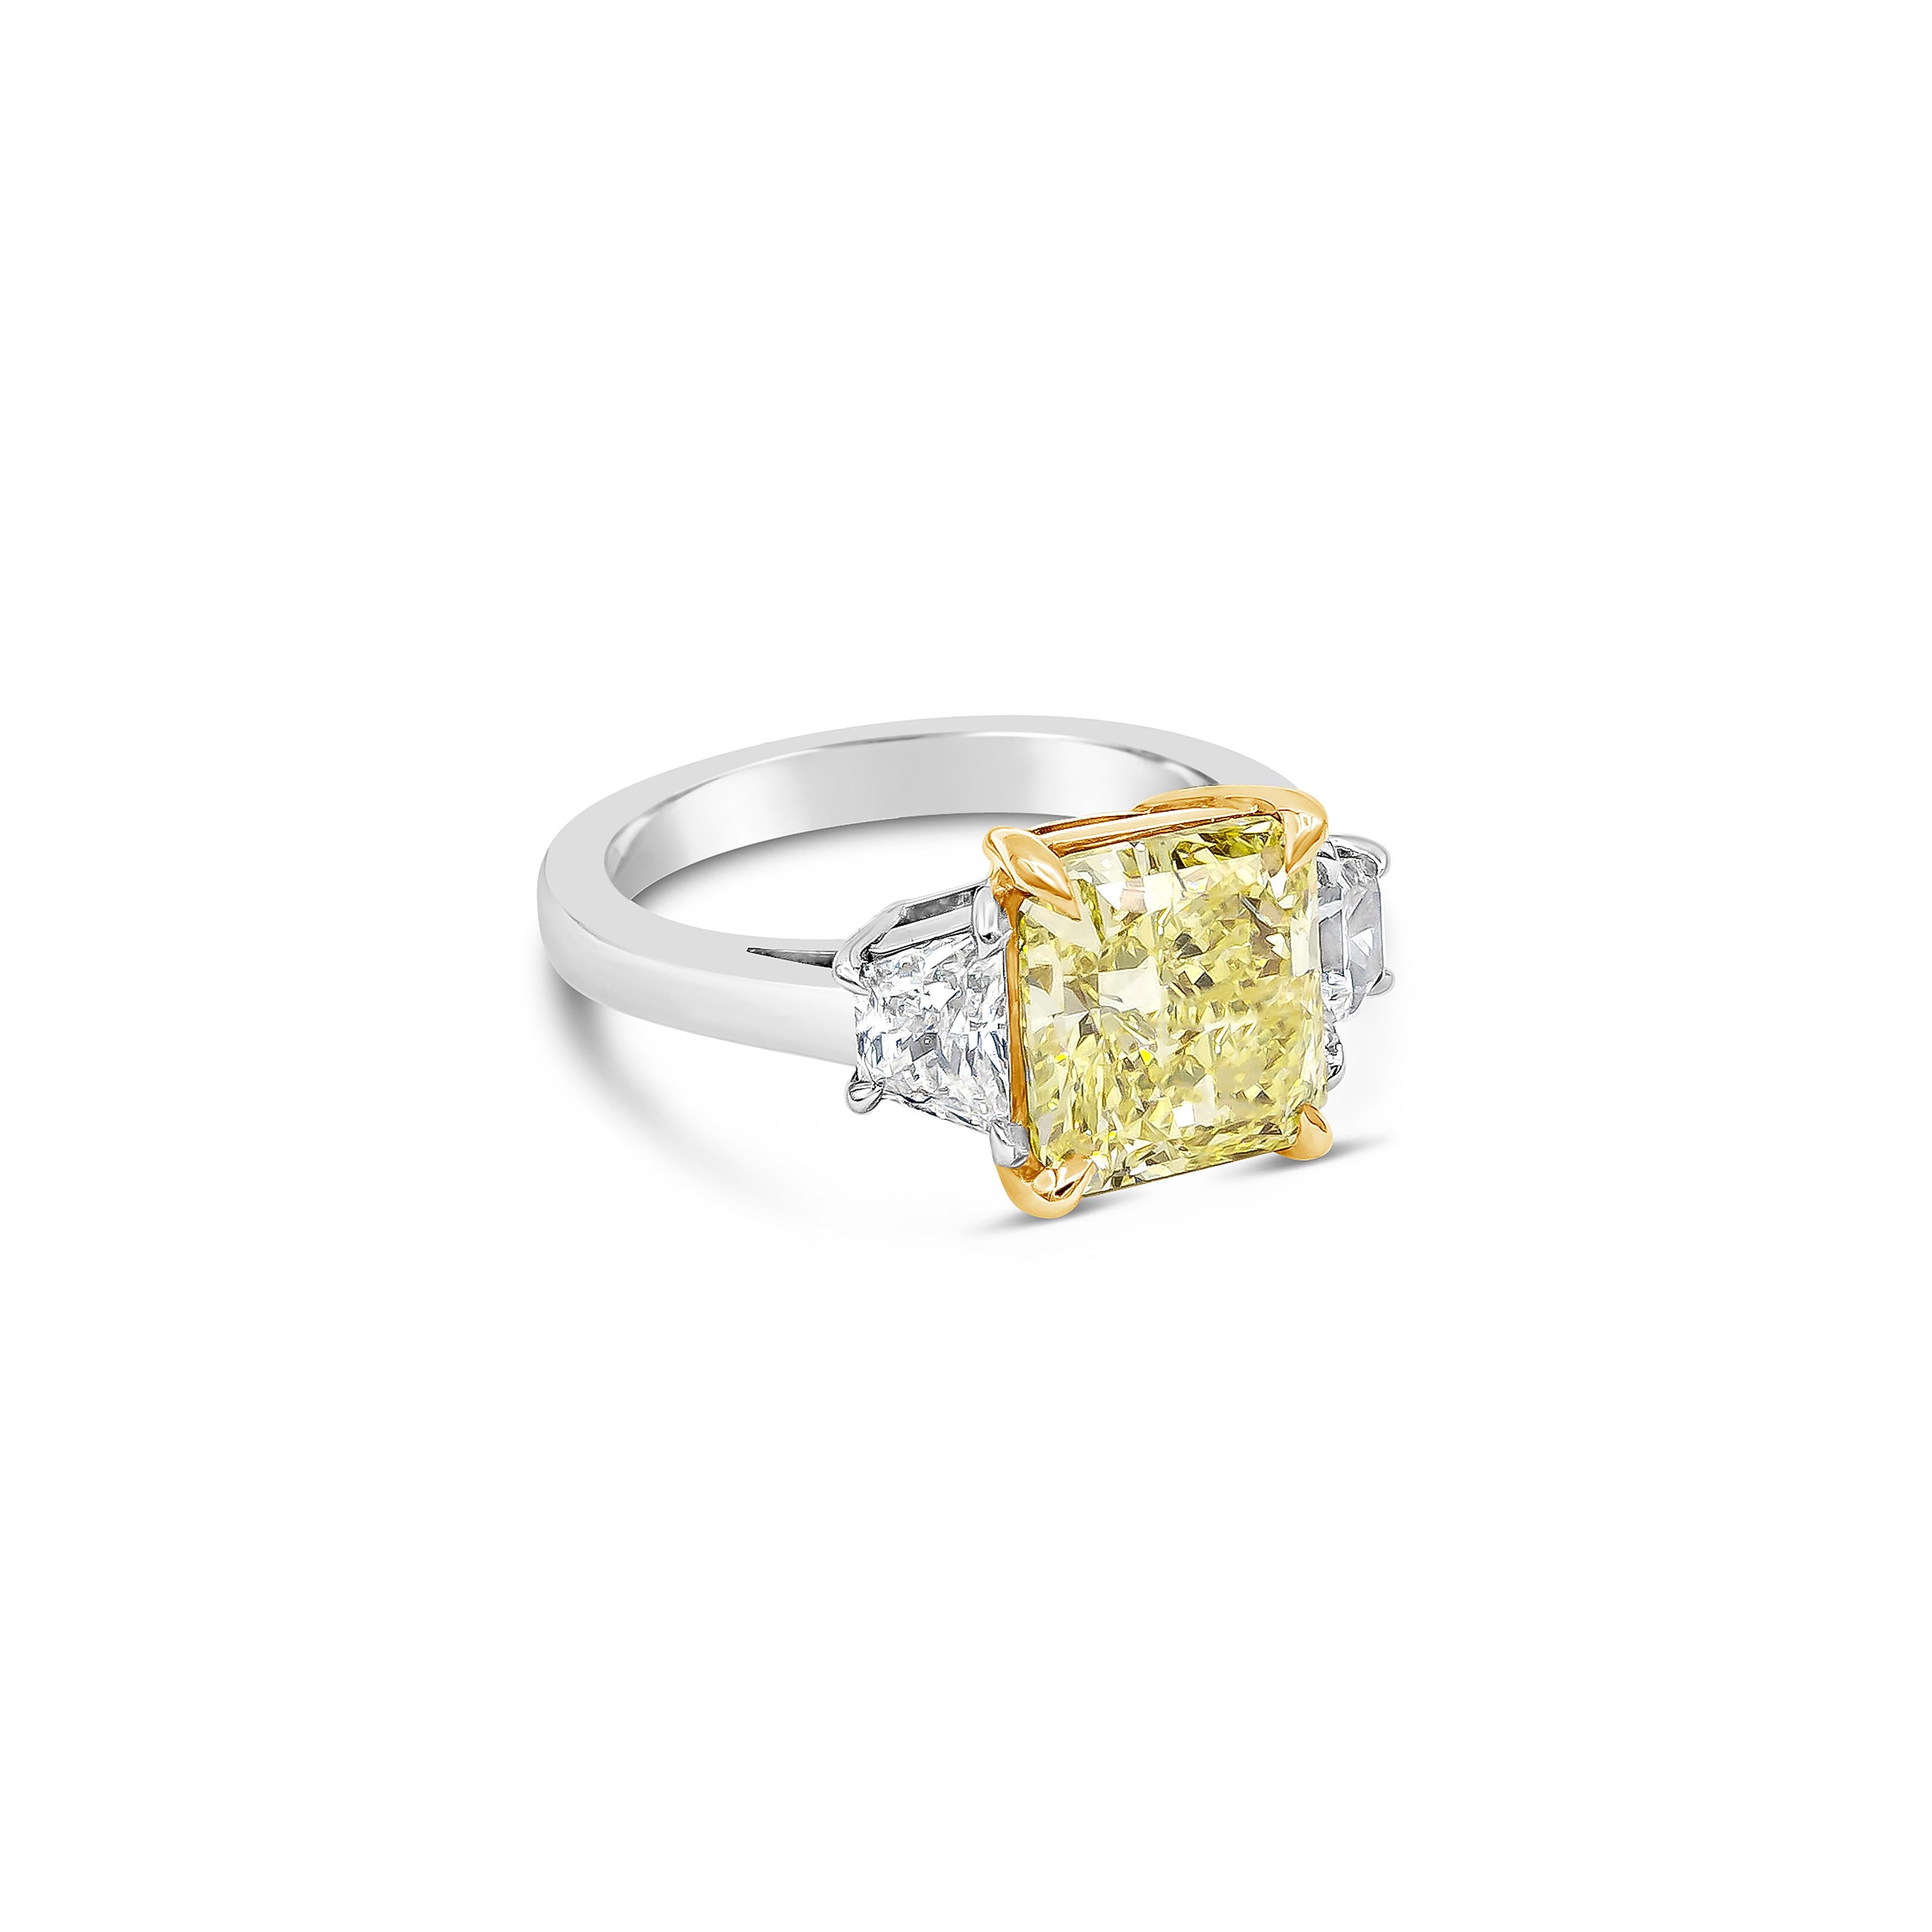 Features a 3.31 carats radiant cut diamond that GIA certified as Fancy Yellow color, VVS2 in clarity, set in a 18k yellow gold four prong basket setting. Elegantly flanked by two trapezoid diamonds in a platinum mounting and composition weighing